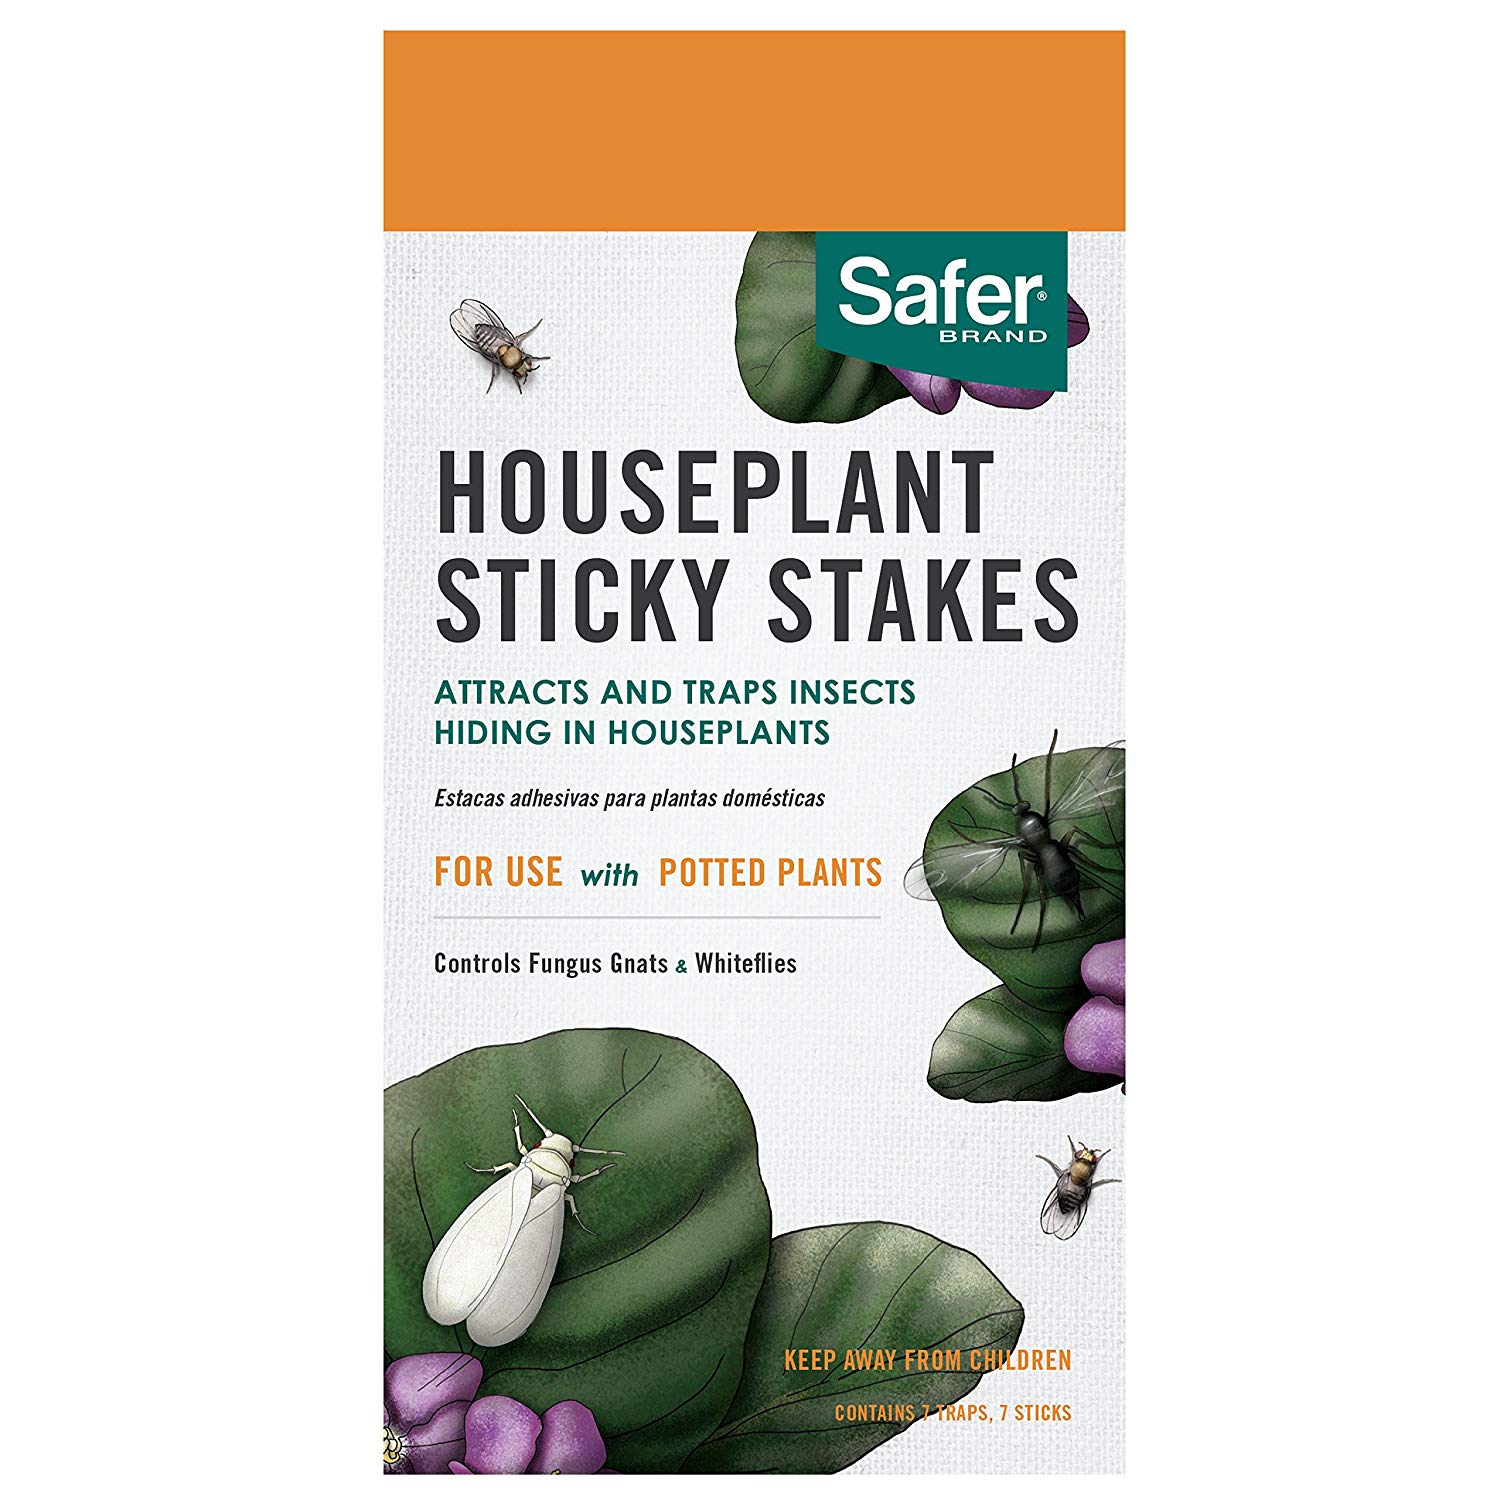 Houseplant Sticky Stakes Insect Trap